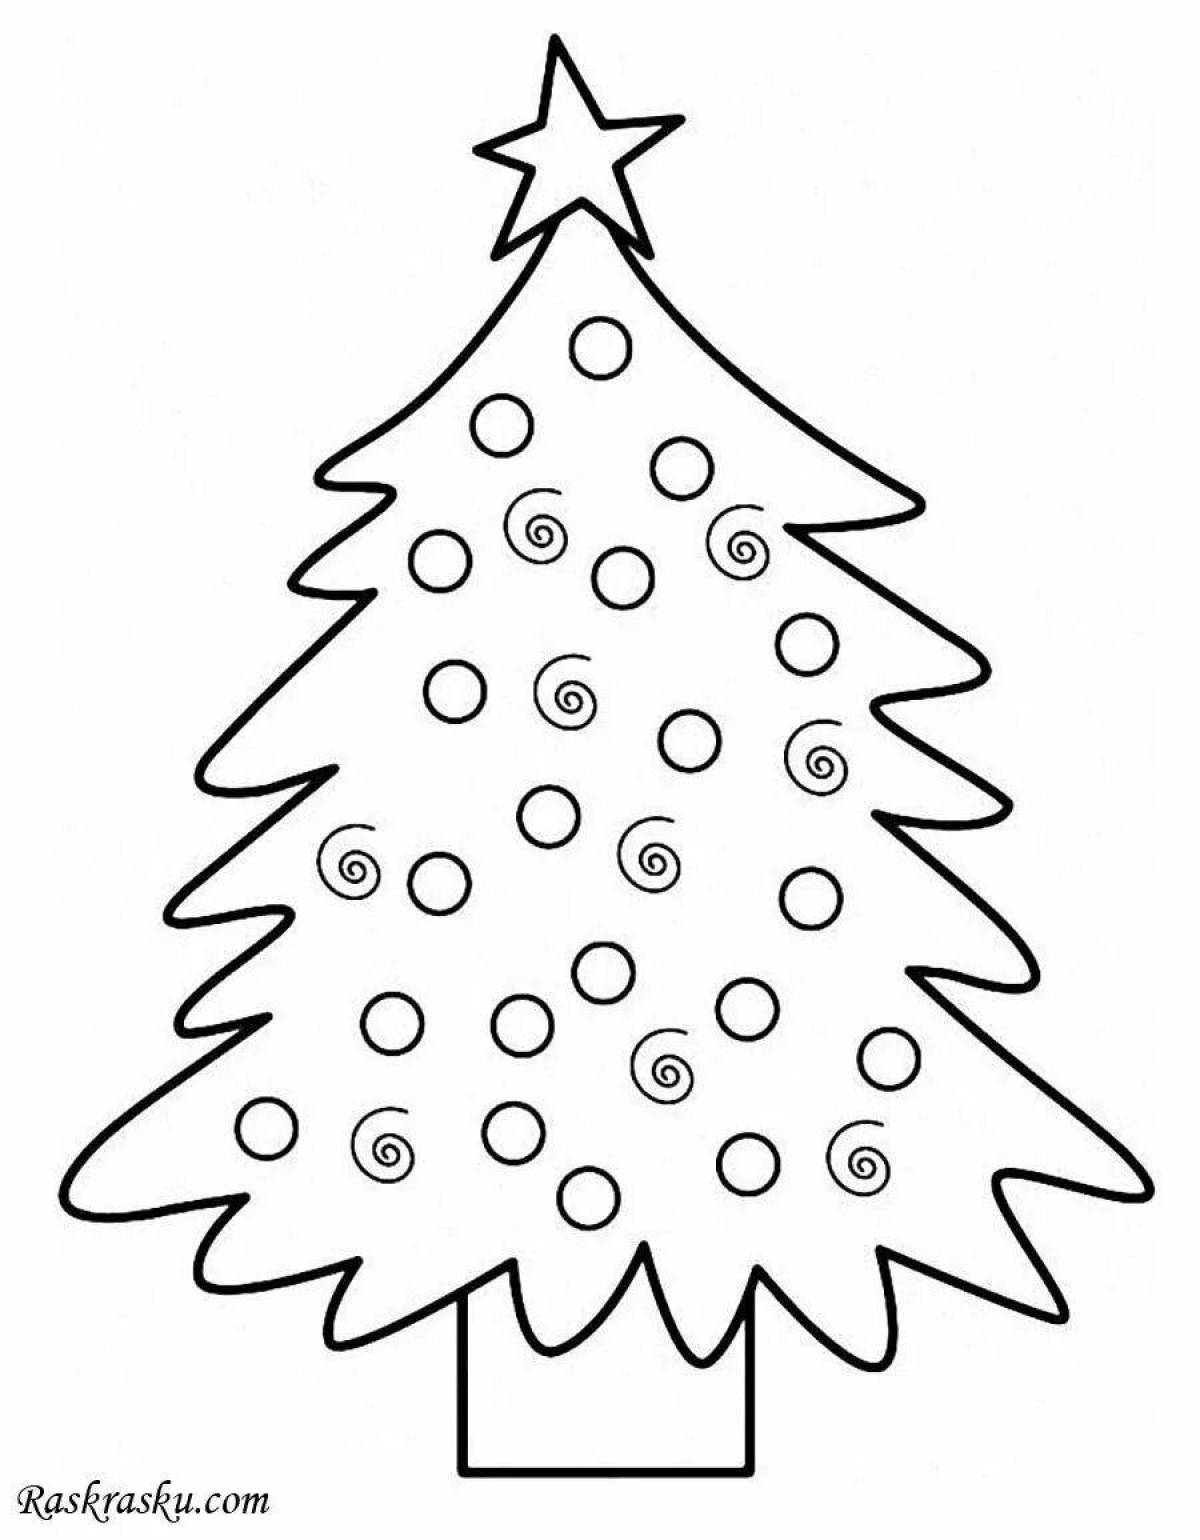 Sparkly Christmas tree with balls for kids